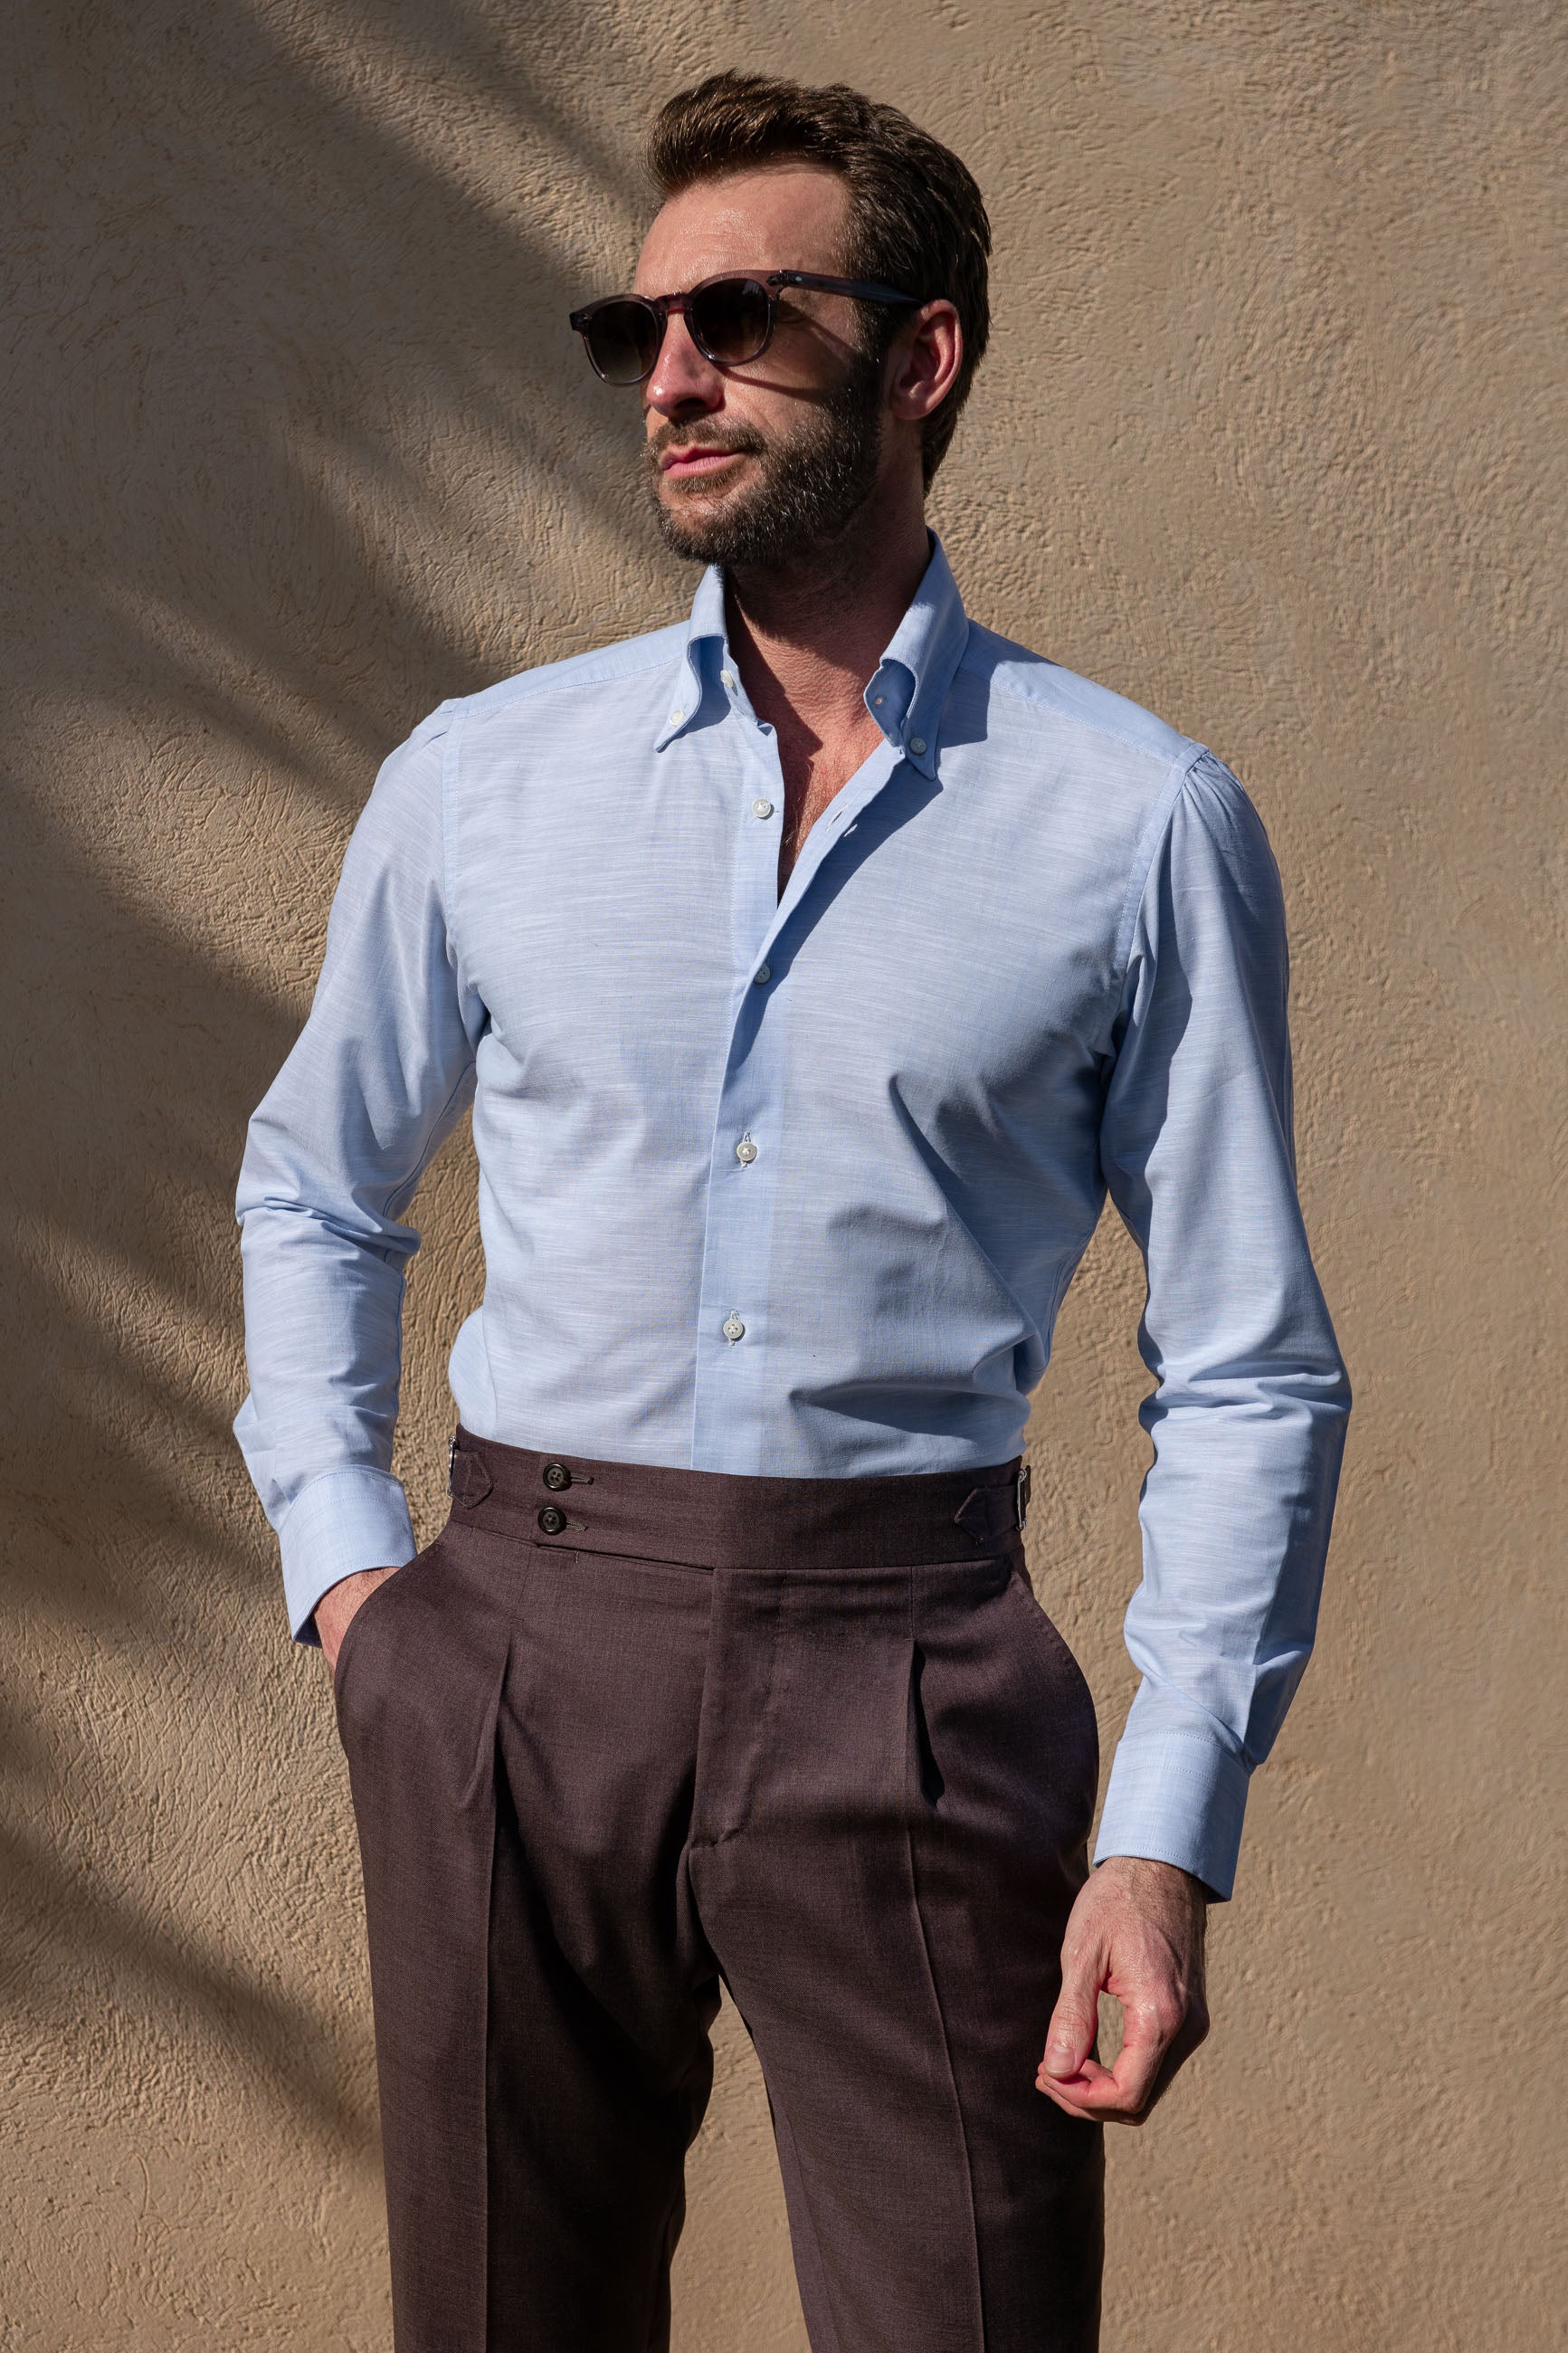 chemise à col boutonné en bambou bleu clair "Collection Sartoriale" - Made In Italy